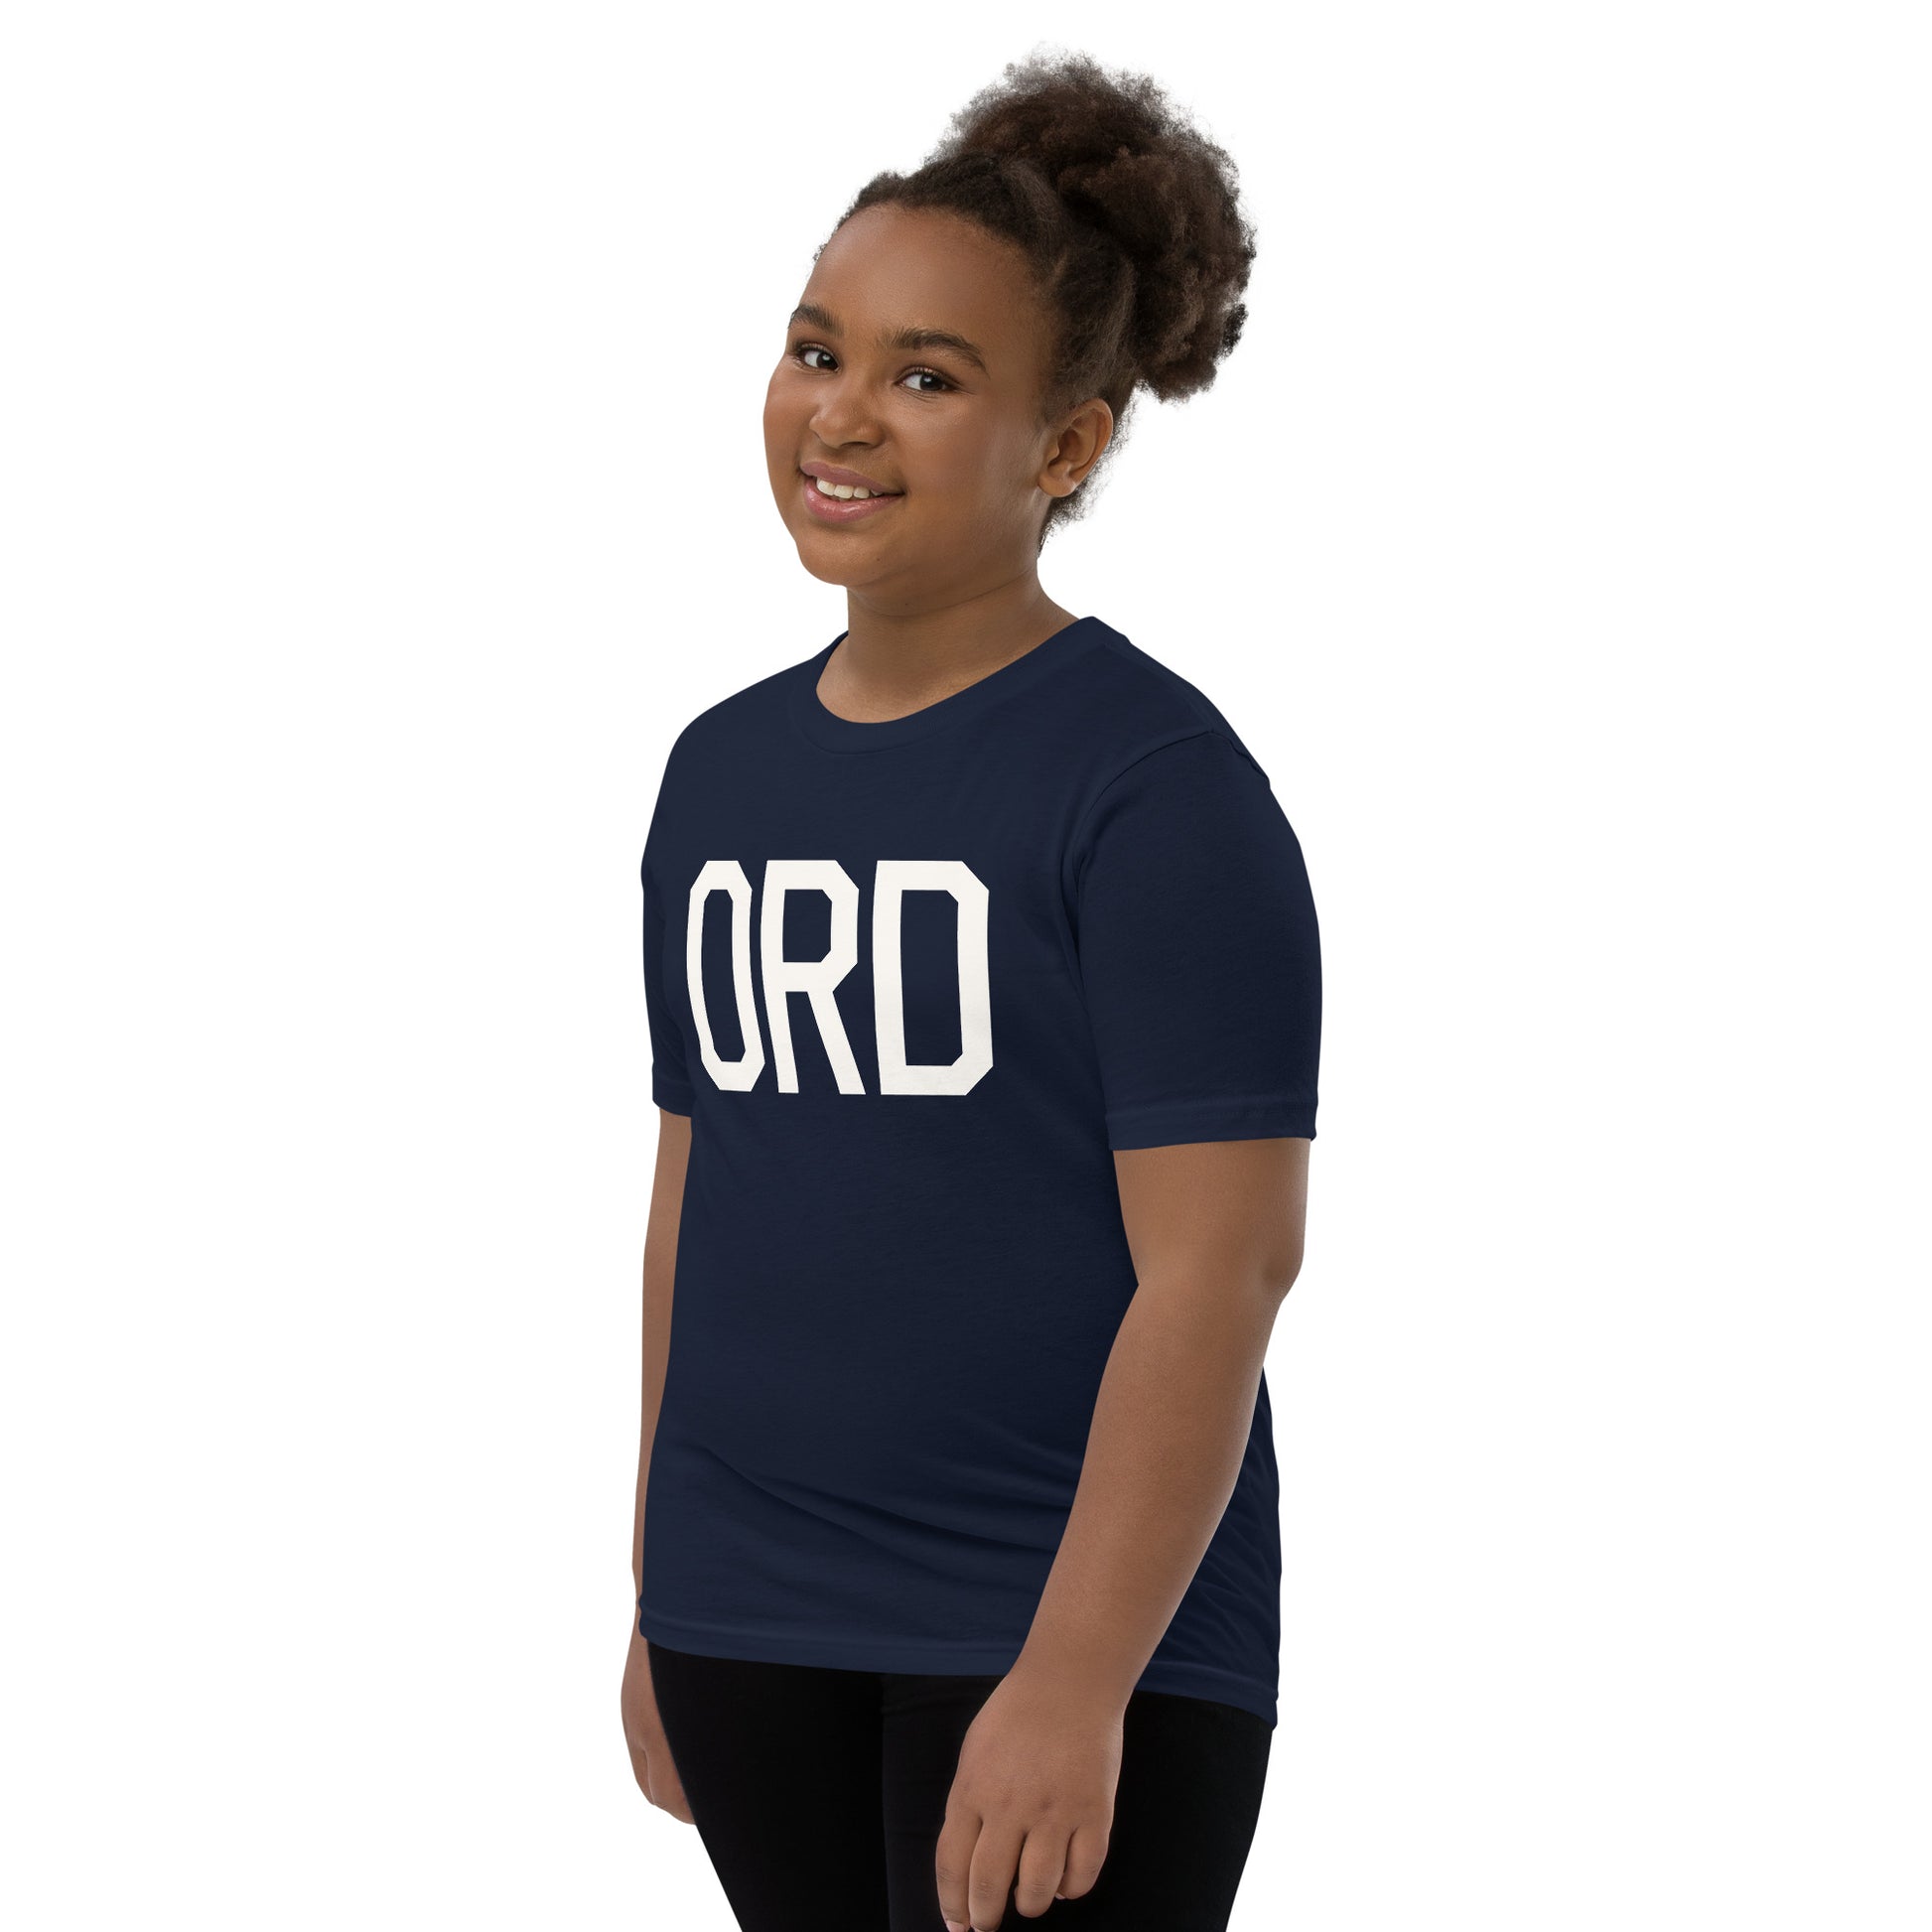 Kid's T-Shirt - White Graphic • ORD Chicago • YHM Designs - Image 02